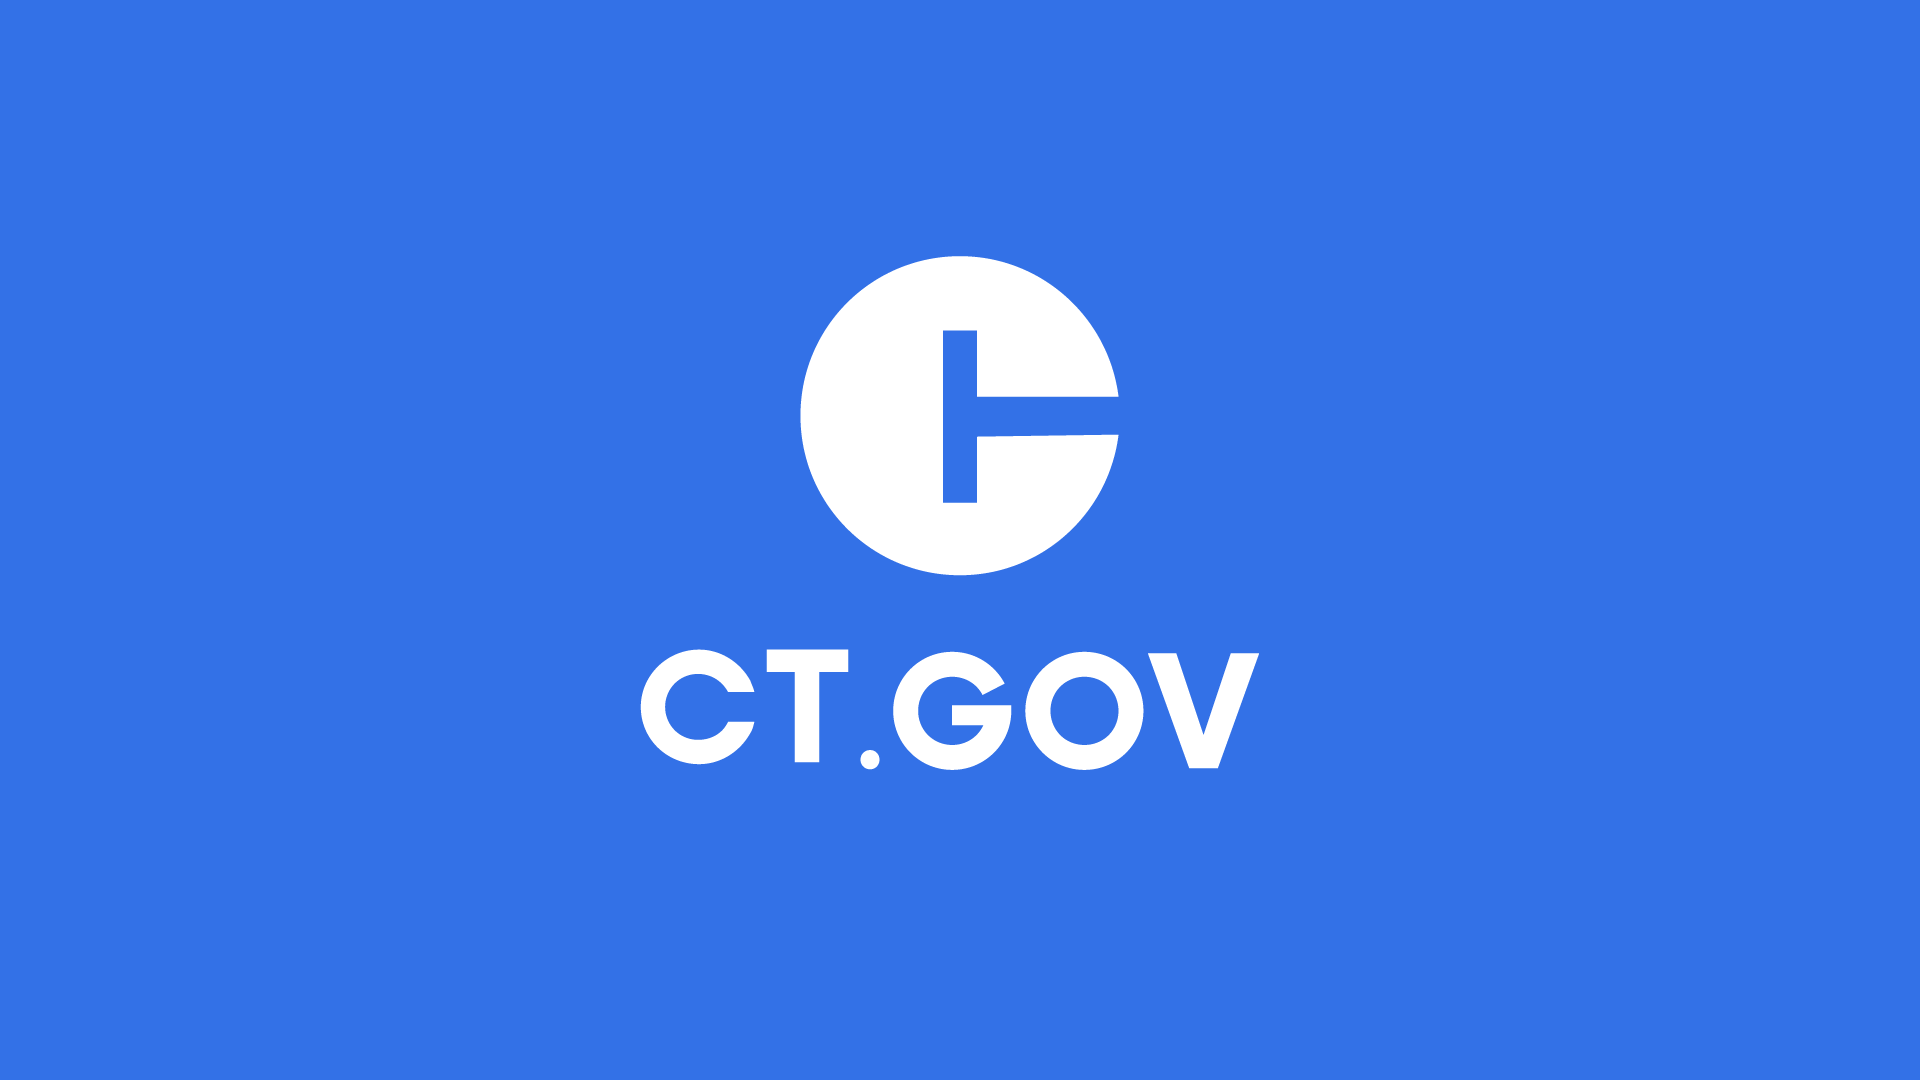 Governor Lamont, Connecticut State Colleges and Universities, and Google Announce Google Career Certificates Are Now Available Across the Entire CSCU System